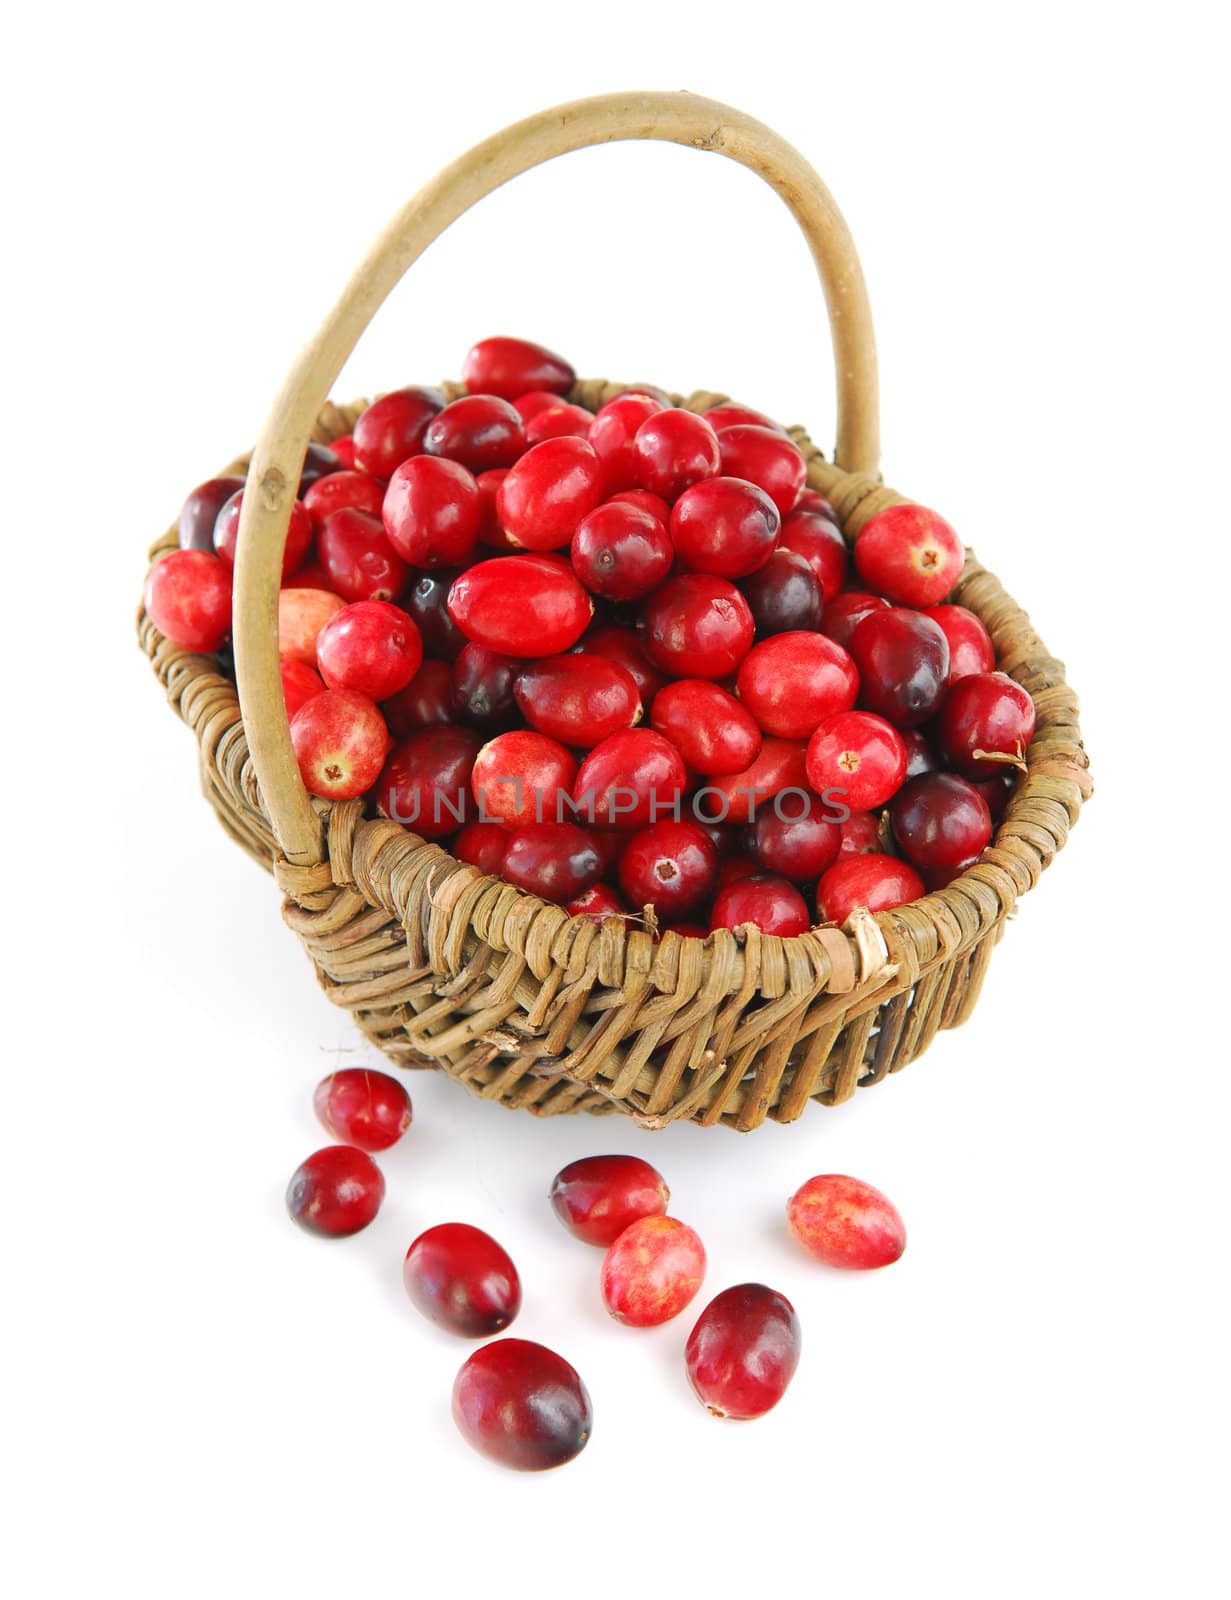 Cranberries in a basket by elenathewise